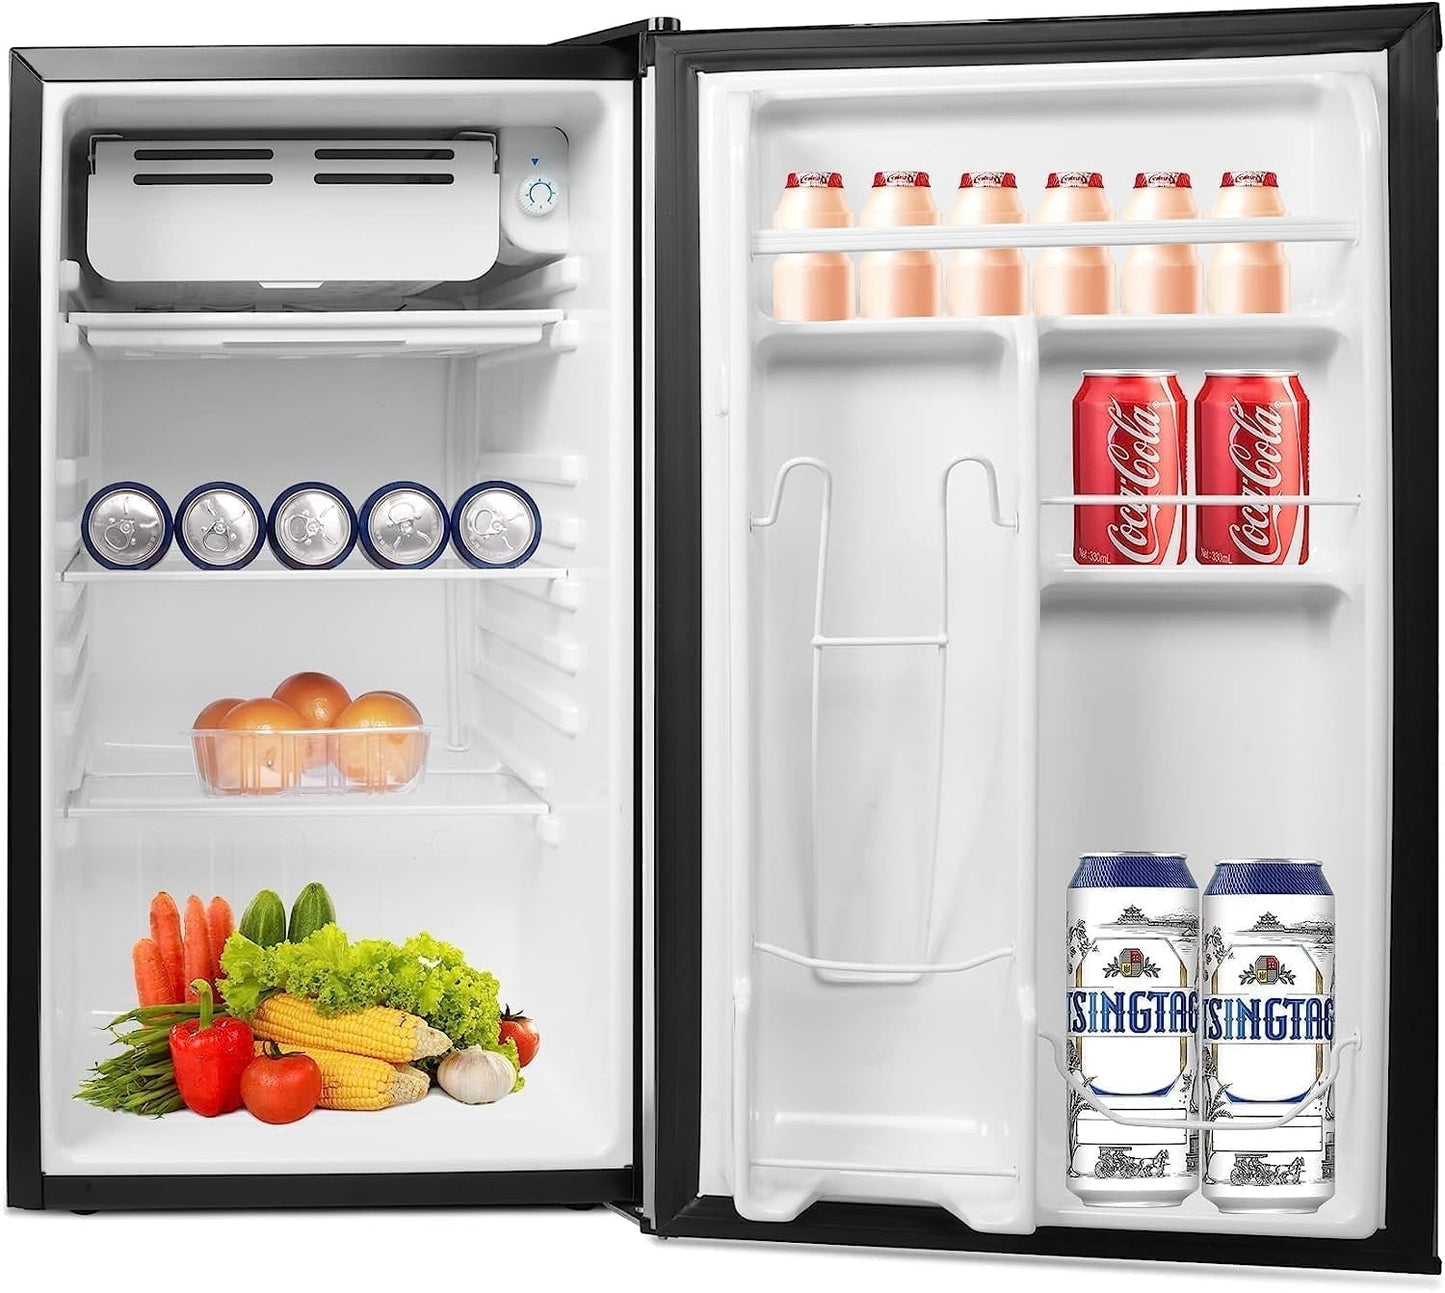 1.6 Cu.ft. Mini Fridge with Freezer. Single-Door Compact Refrigerator with Adjustable Legs. Adjustable Thermostat Control. Removable Shelf. Small Fridge Perfect for Home/Dorm/Office/Apartment